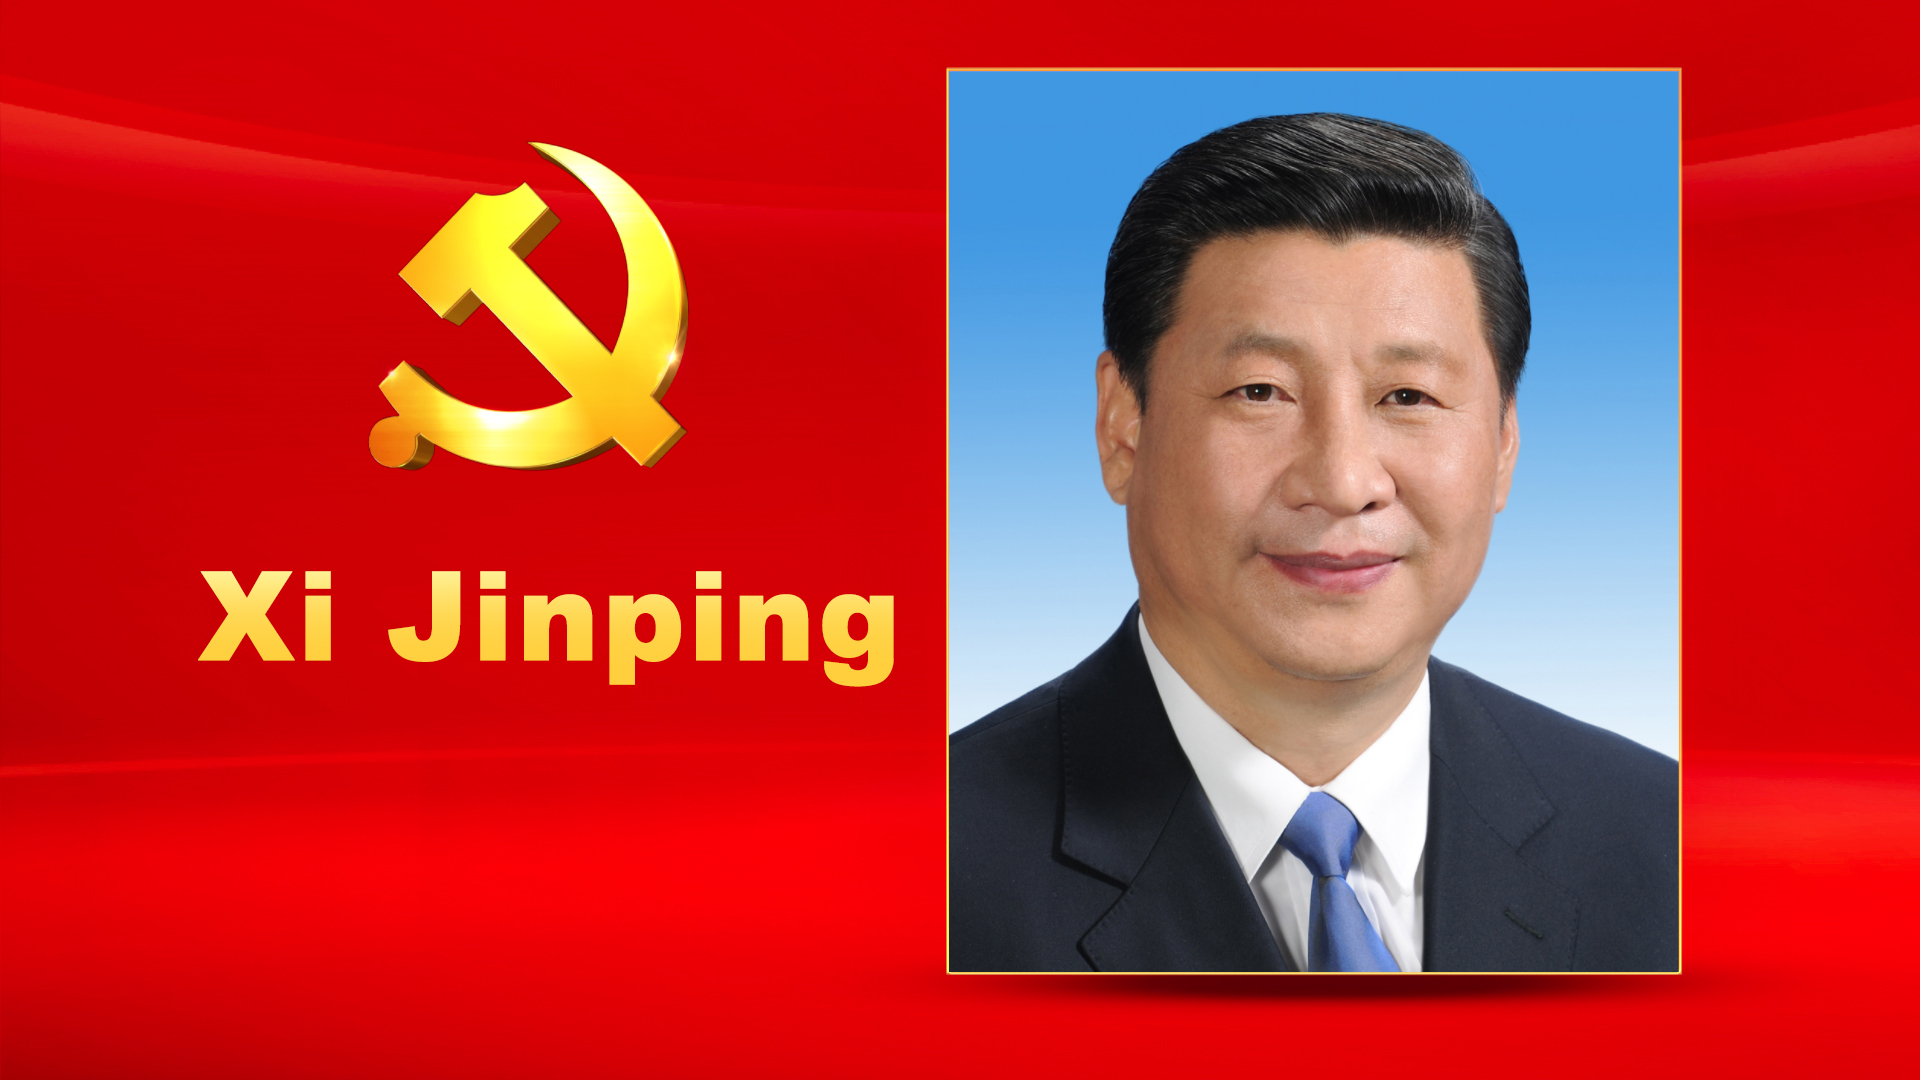 Xi Jinping, male, Han ethnicity, was born in June 1953 and is from Fuping, Shaanxi Province. He began his first job in January 1969 and joined the Communist Party of China (CPC) in January 1974. Xi graduated from School of Humanities and Social Sciences, Tsinghua University where he completed an in-service graduate program in Marxist theory and ideological and political education. He holds a Doctor of Law degree. Xi is currently General Secretary of the CPC Central Committee, Chairman of the CPC Central Military Commission, President of the People's Republic of China (PRC), and Chairman of the PRC Central Military Commission.